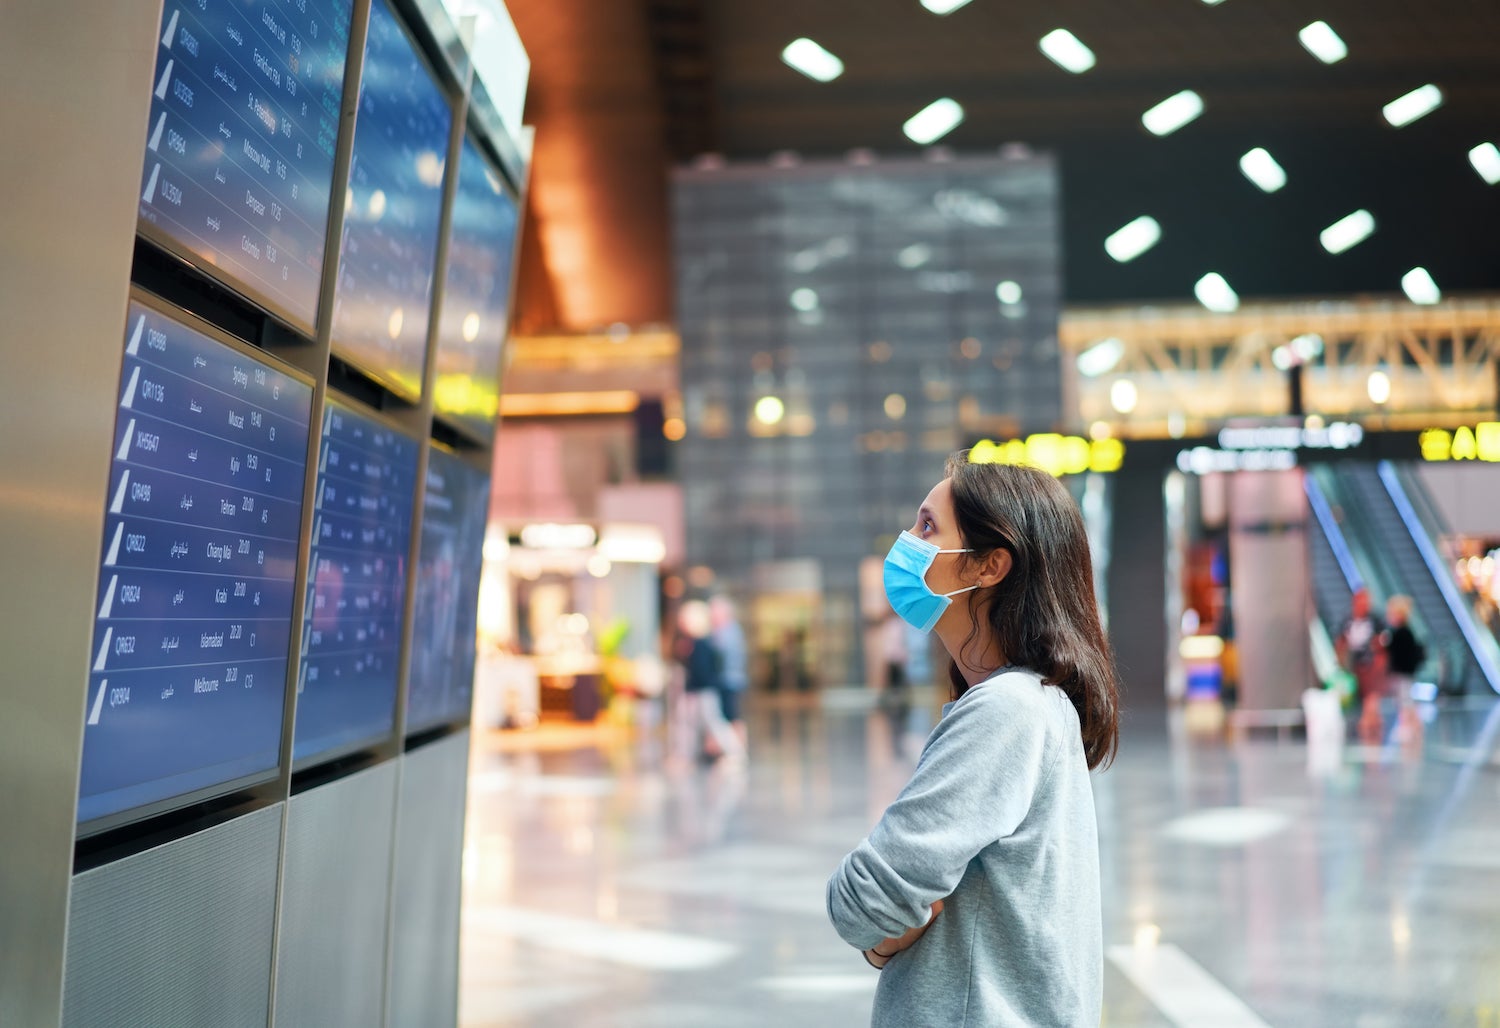 Woman Looking at Flight Departure While Wearng a Mask